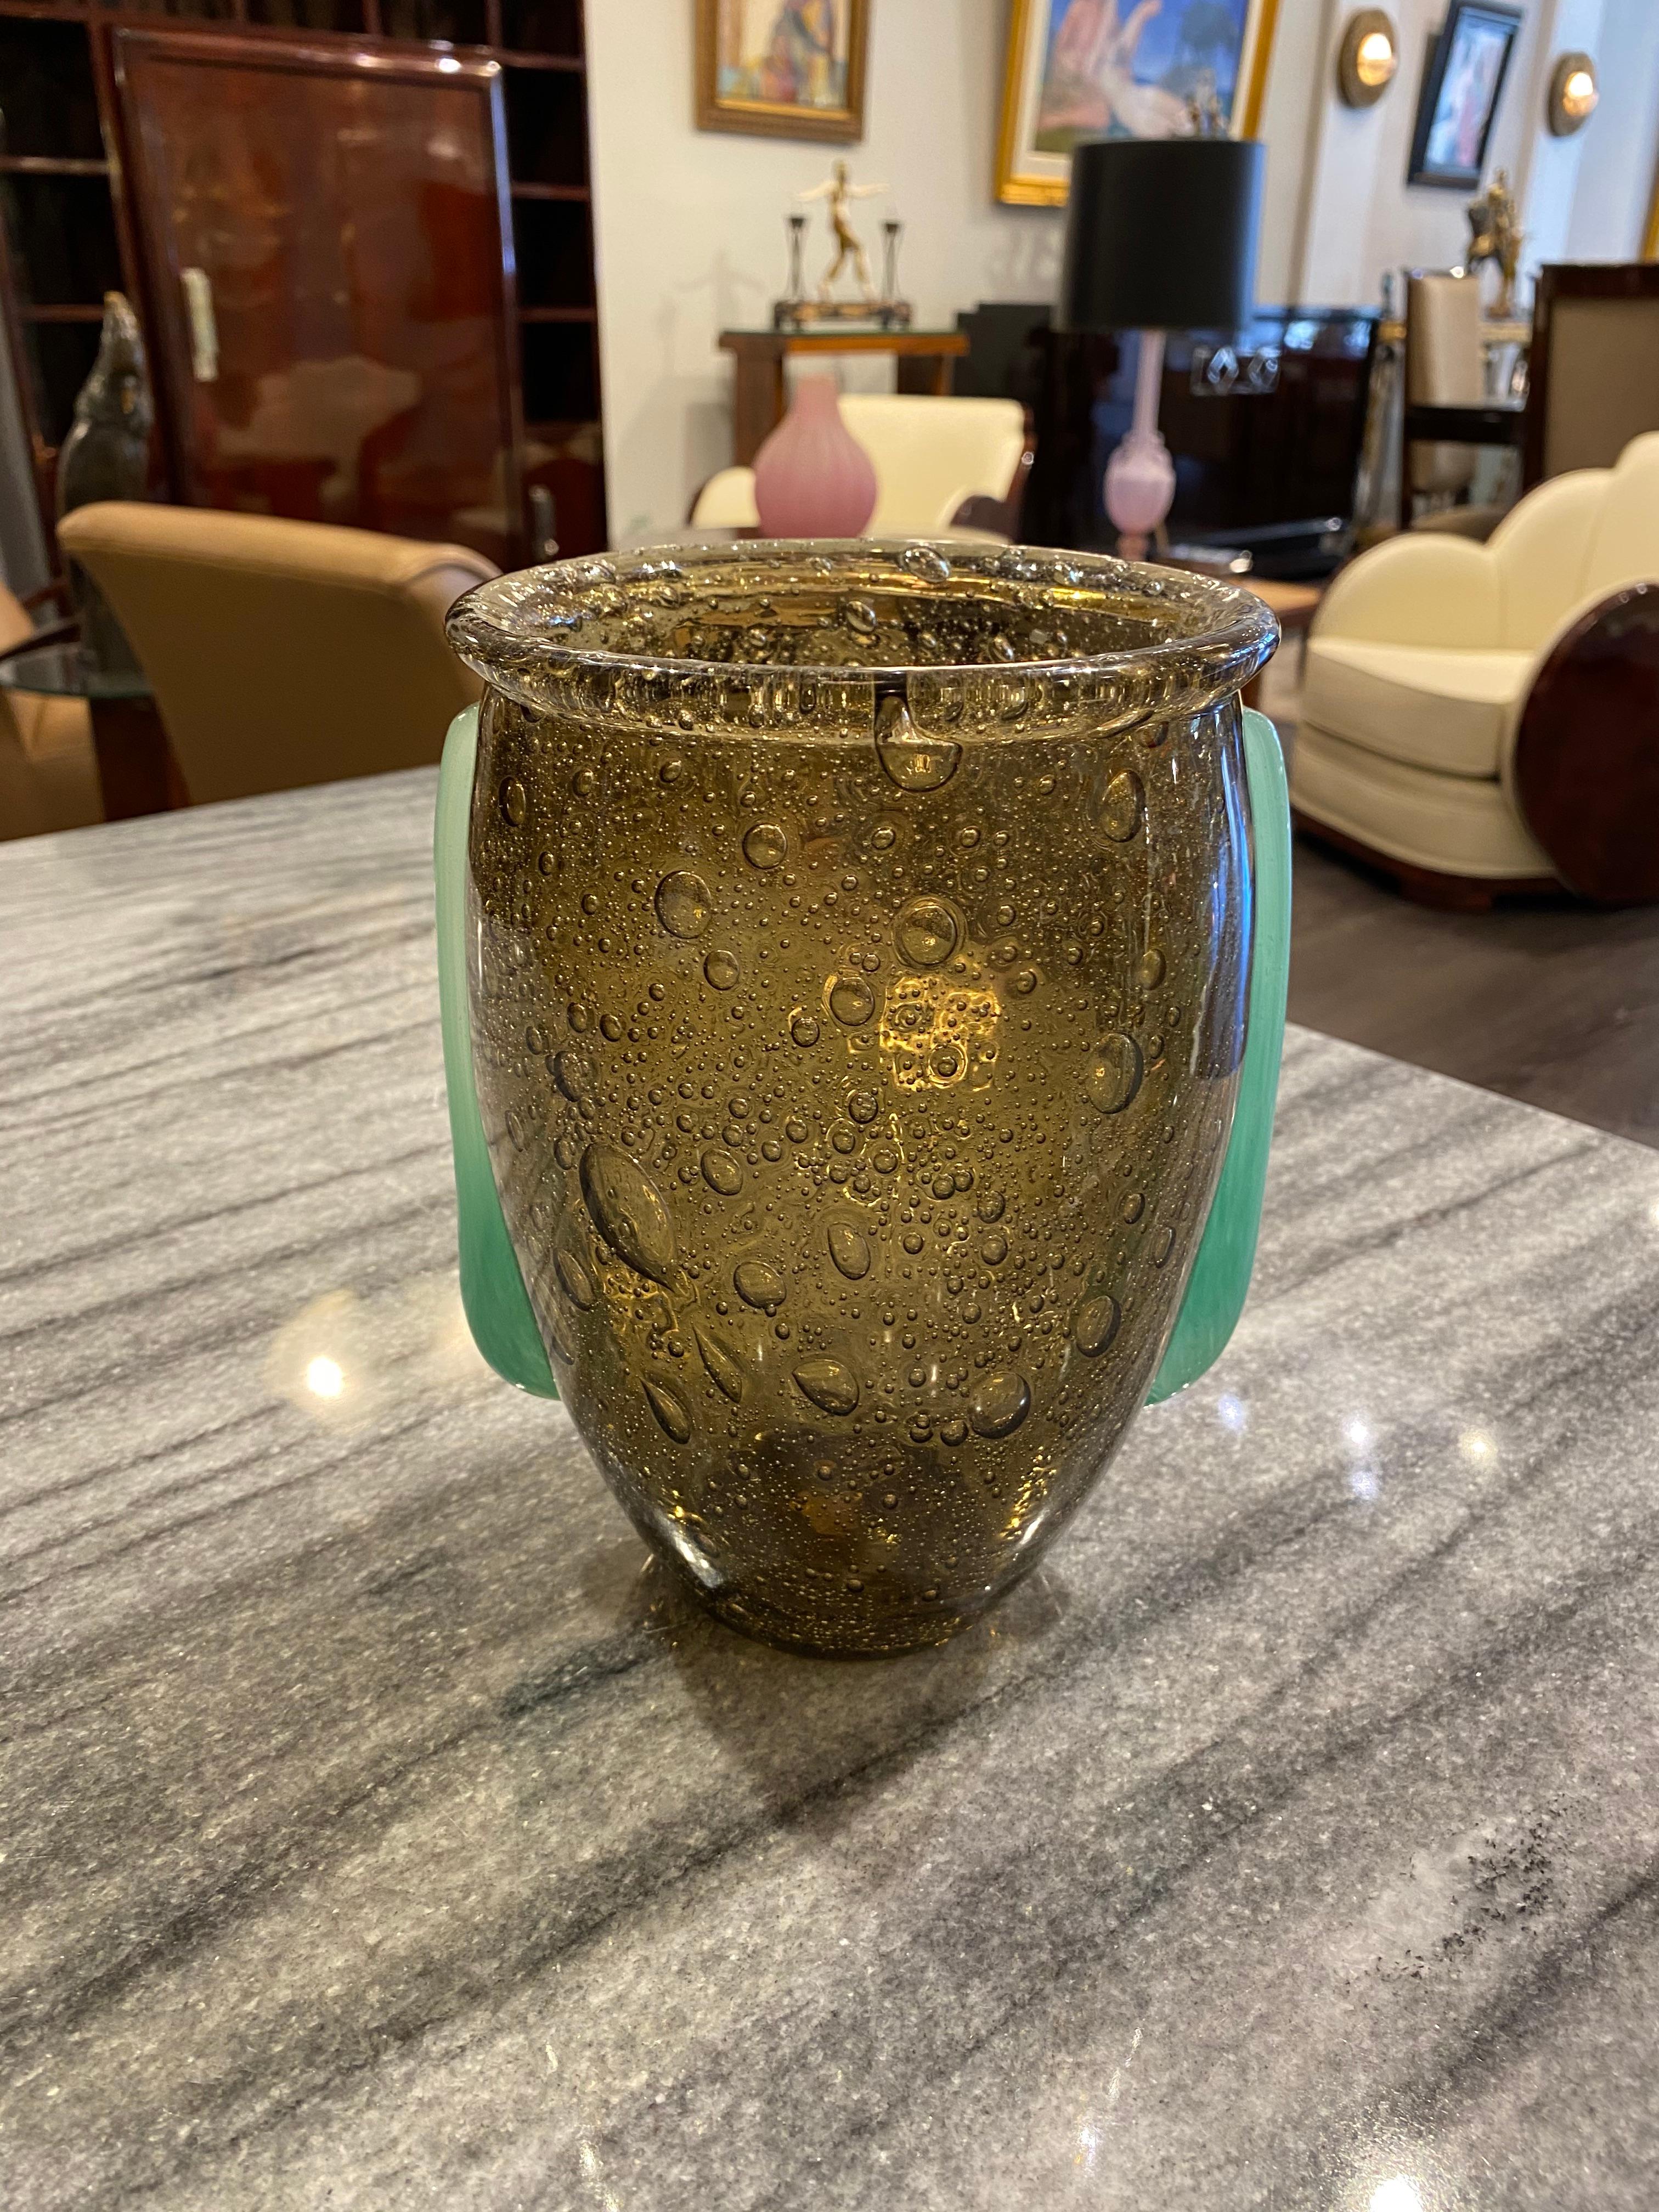 A Smoked Grey vase with a bubbled glass body.  There are handles/applications on each side of the vase in jade-green powdered glass.  This piece is very desirable among collectors since there are very few of them nowadays.  This piece belongs to the